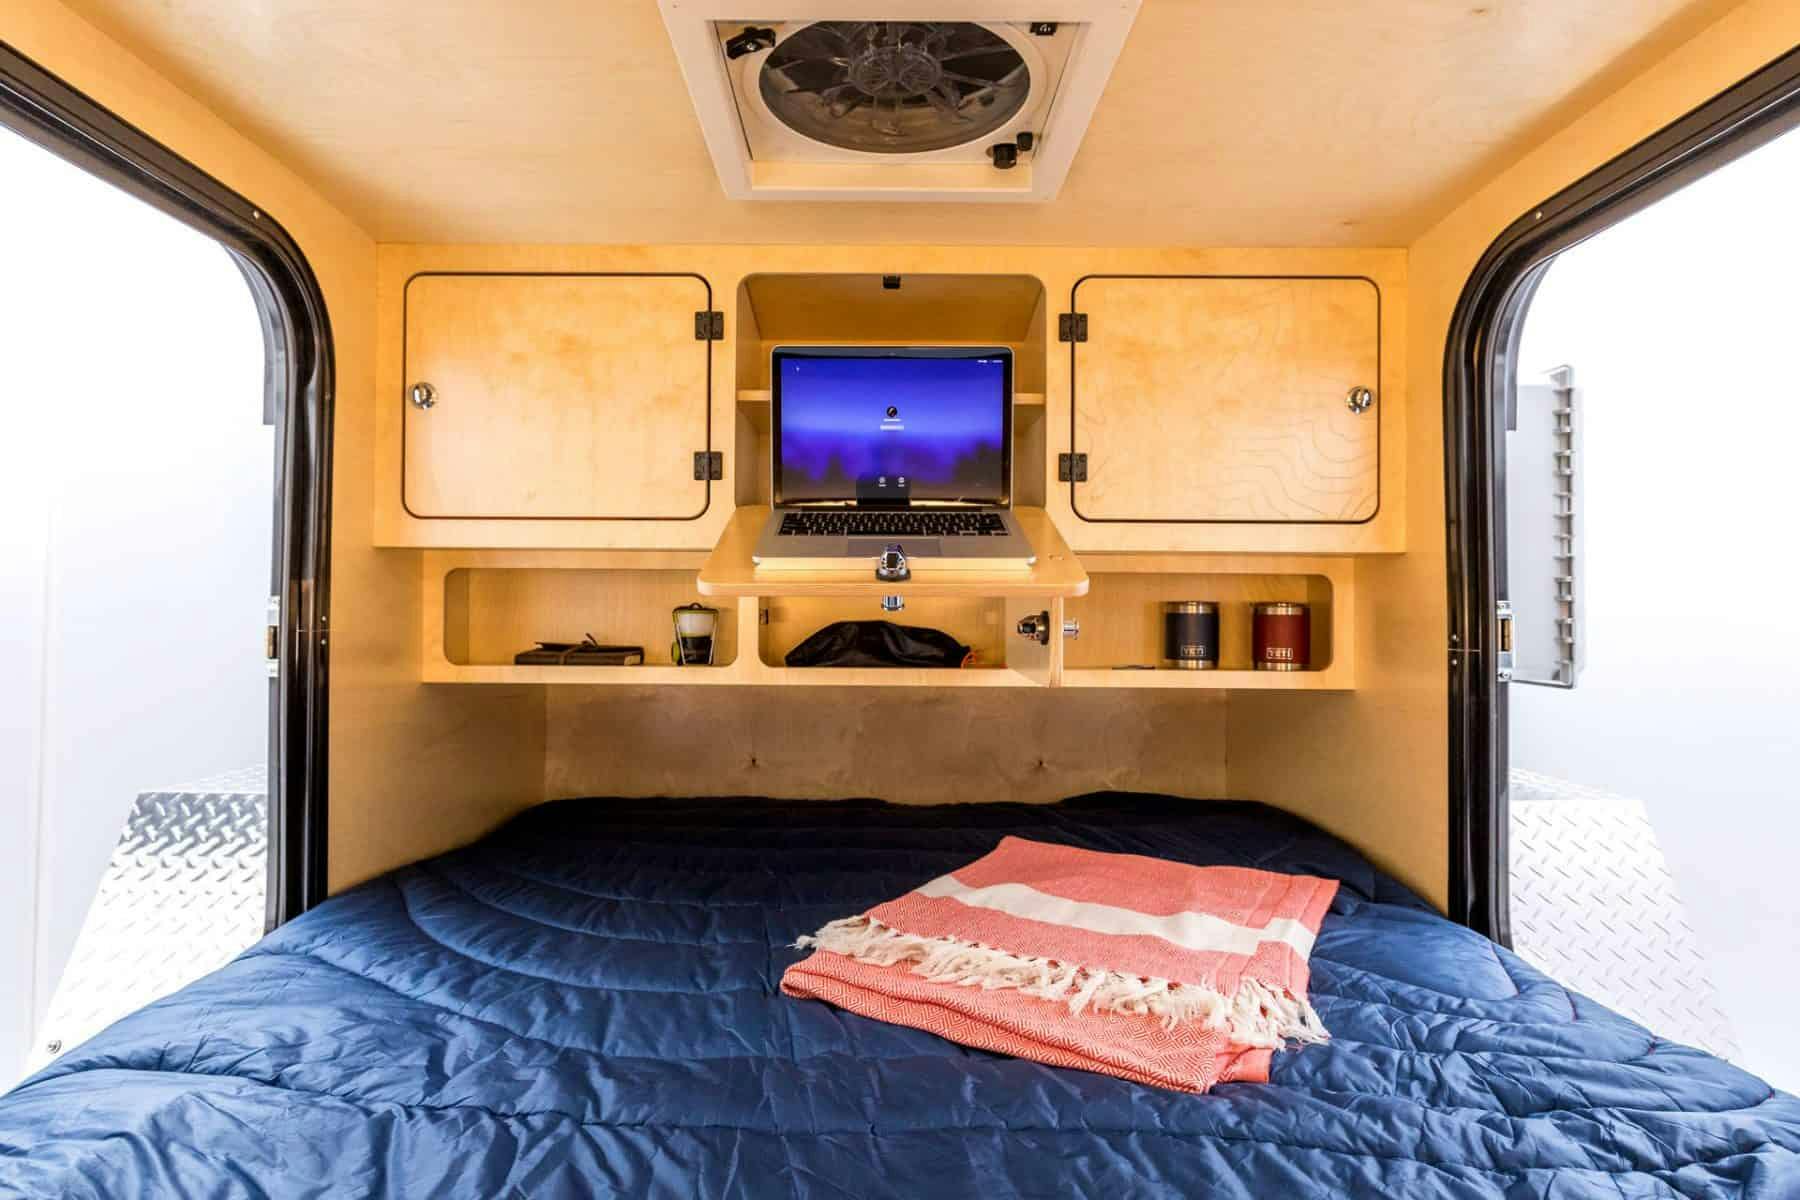 The interior to a teardrop camper, displaying beautiful birch cabinetry and a queen sized bed.